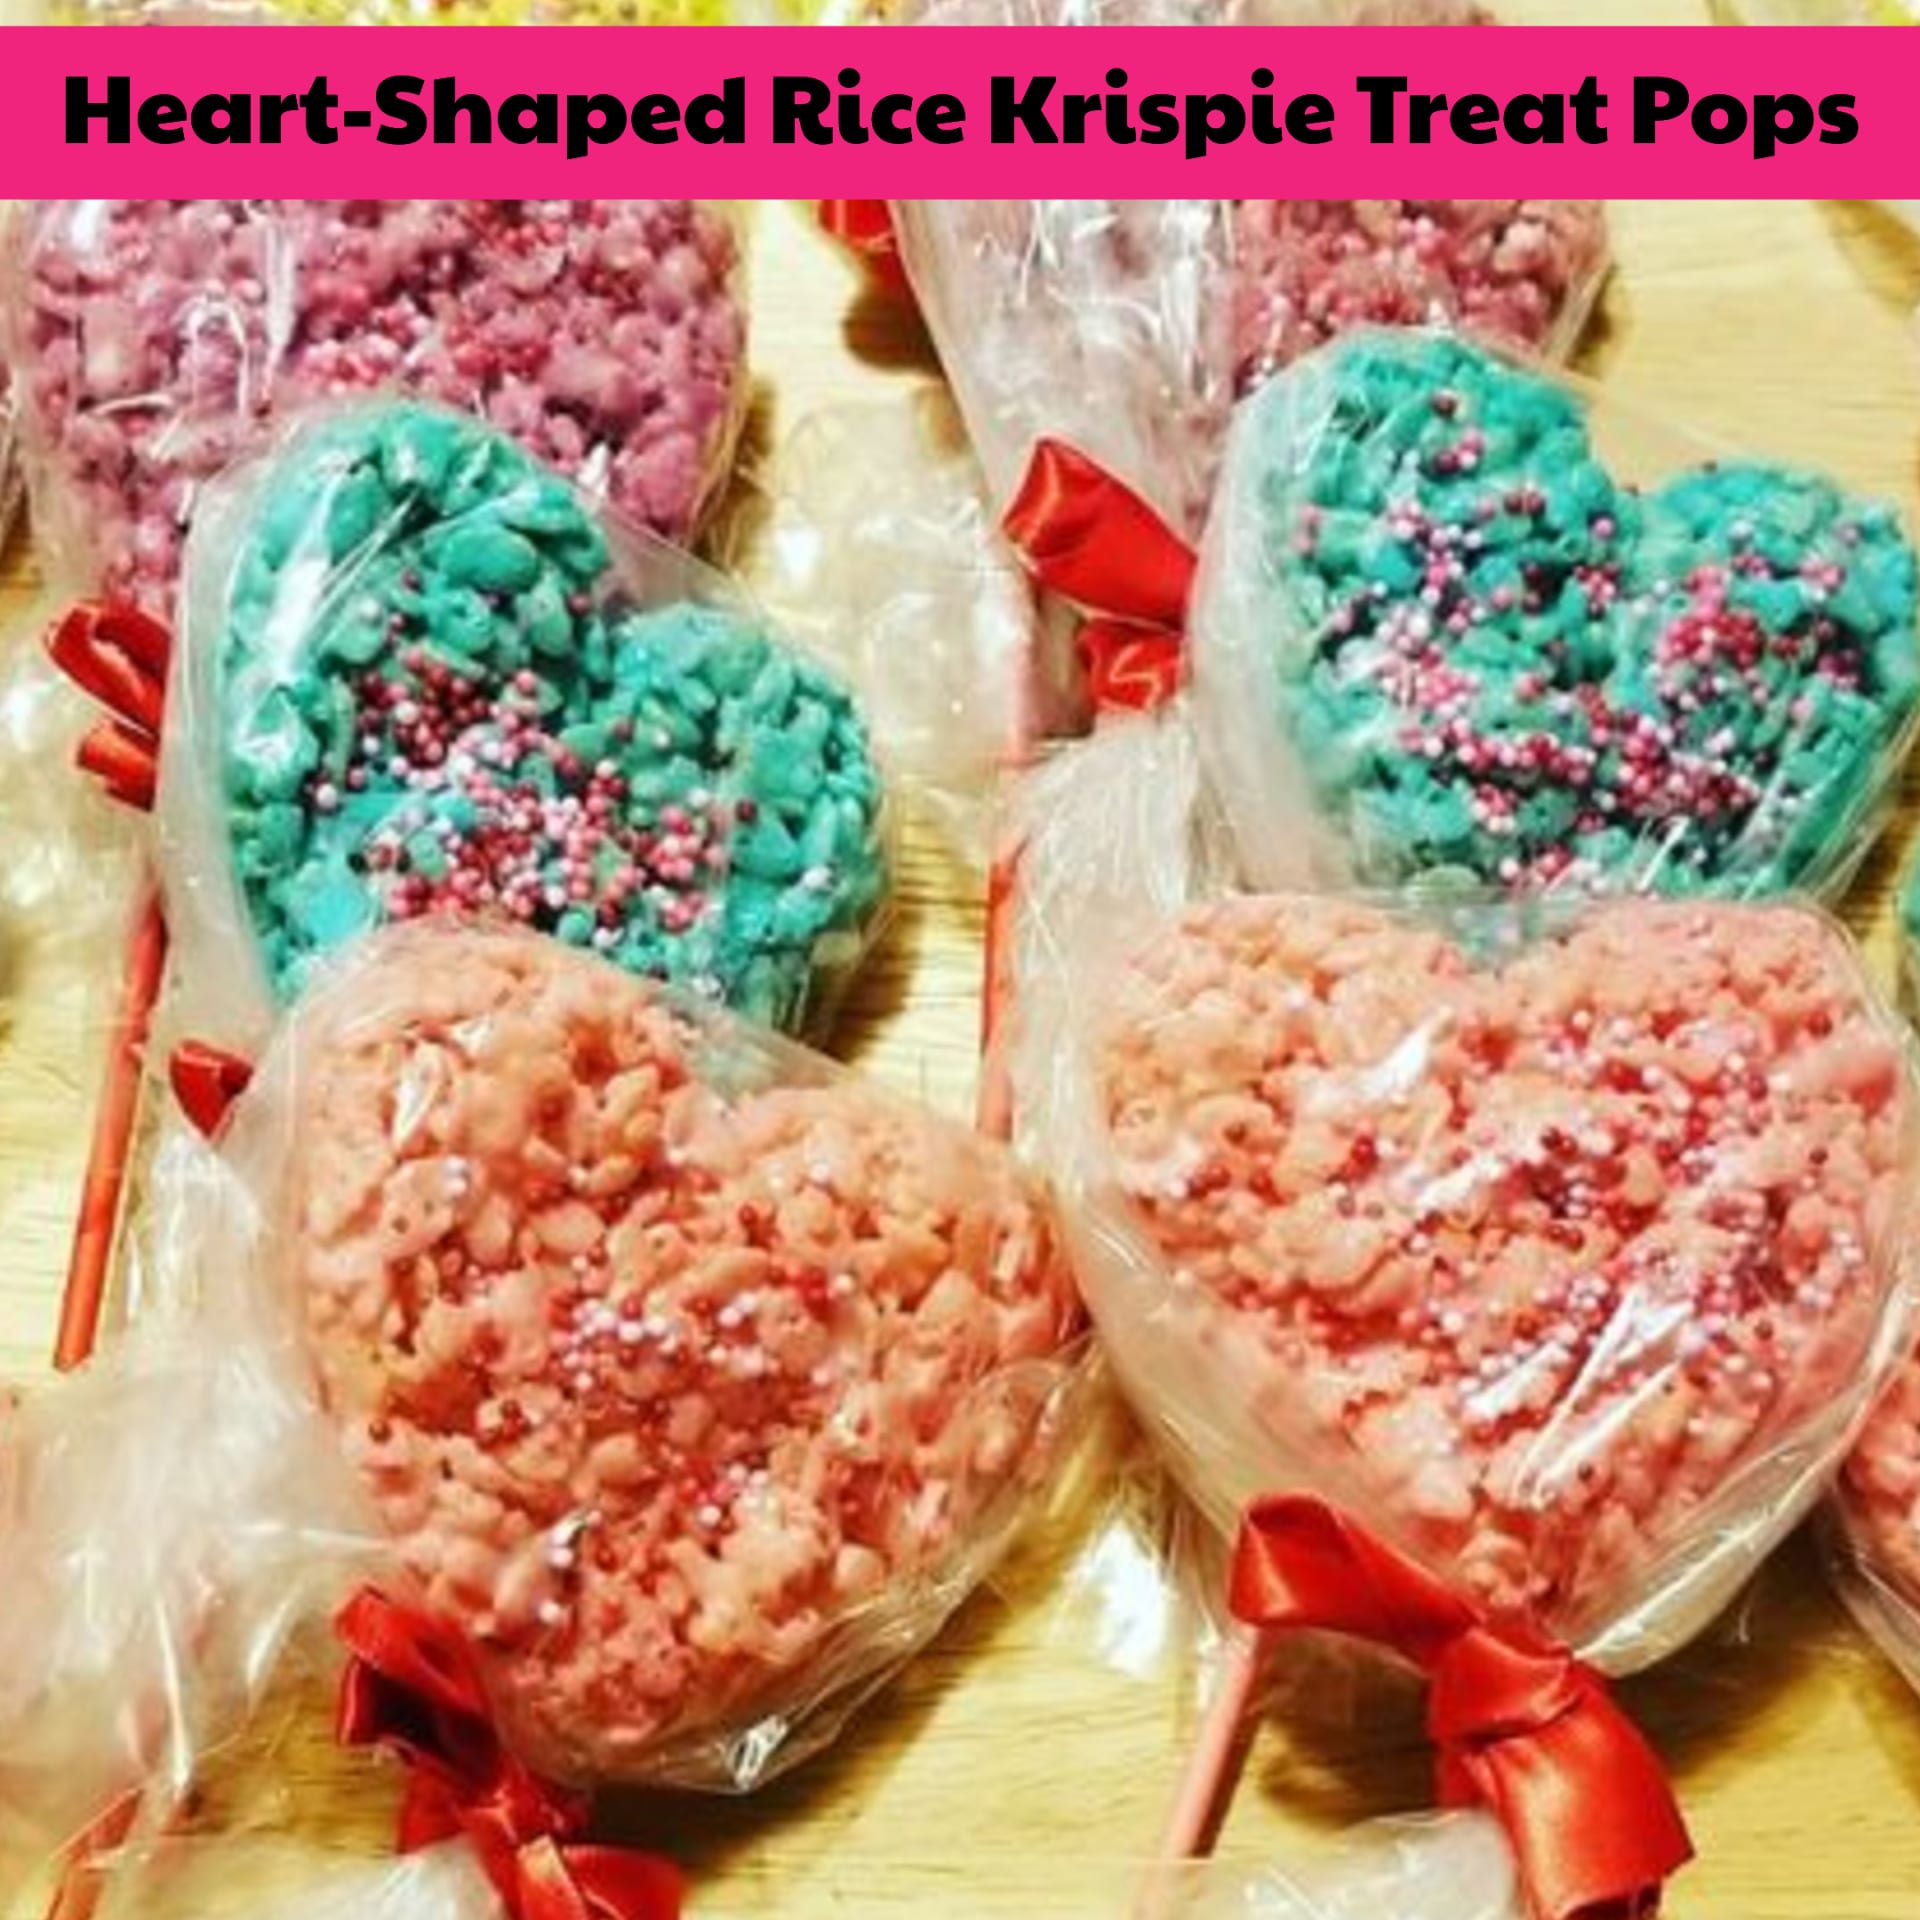 DIY school valentines for classroom, teachers or fun food for a Valentine's Day party at school - fun and easy Rice Krispie treats for parties